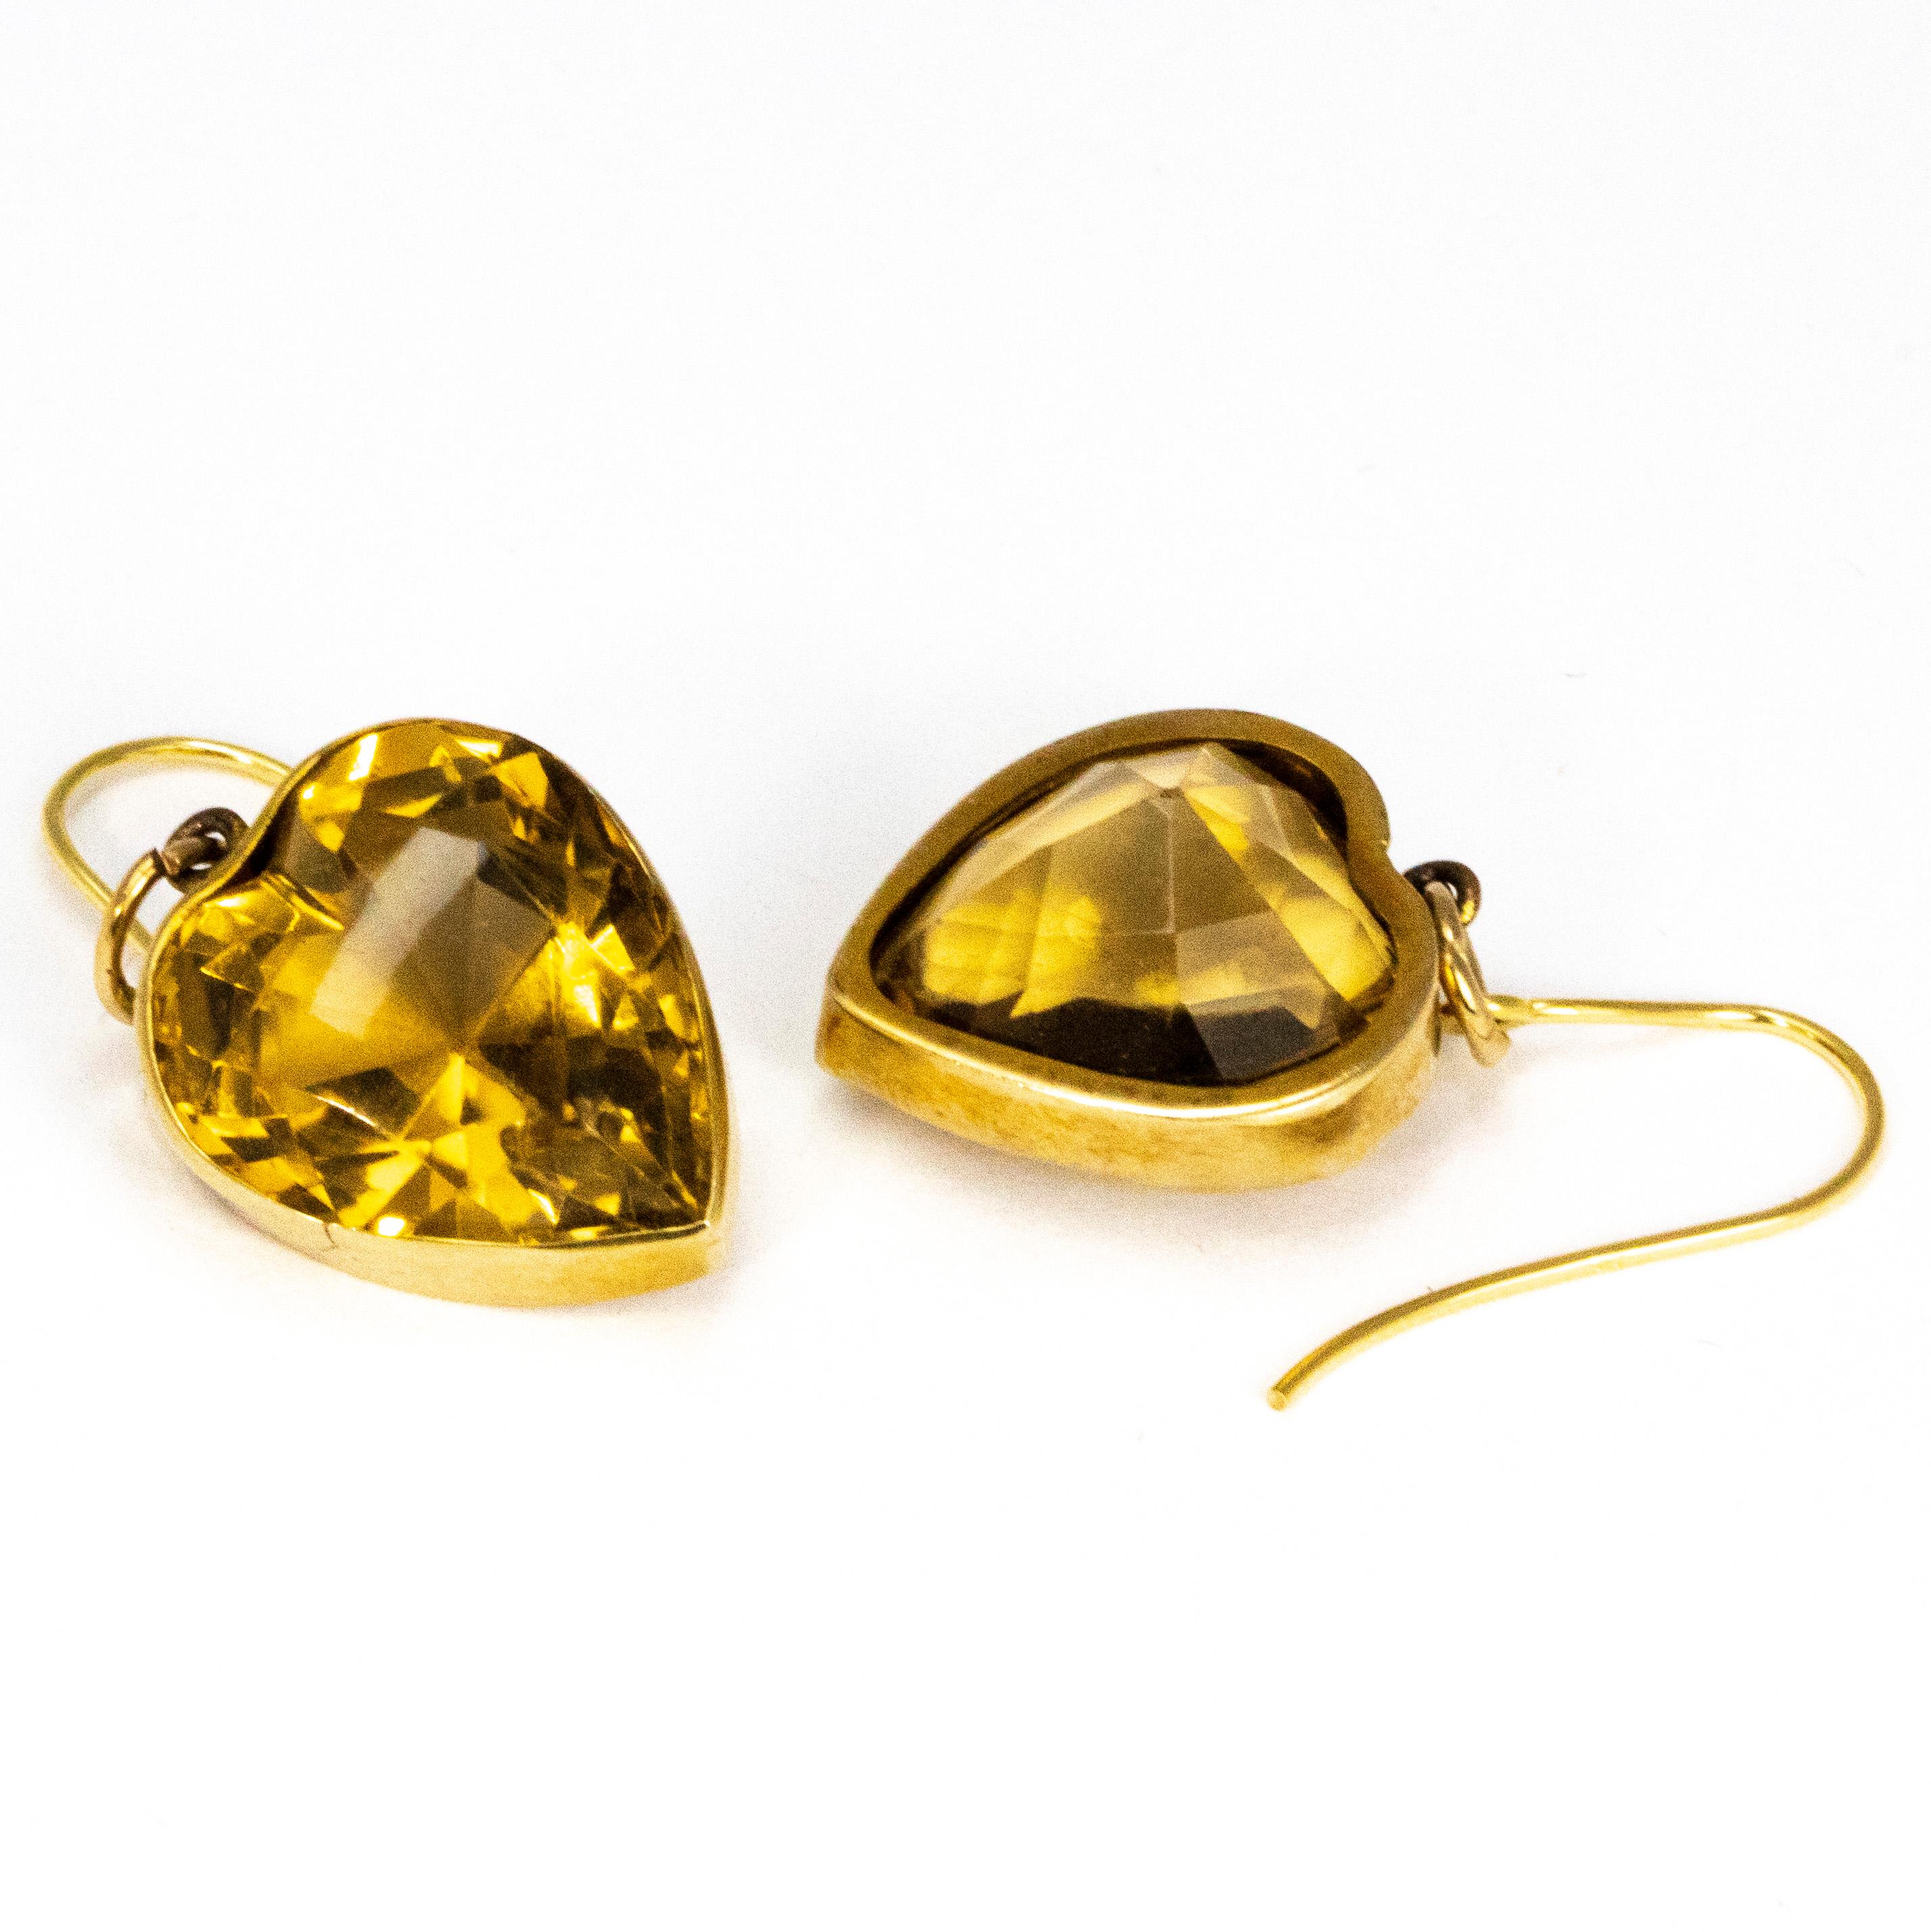 Modern Vintage Citrine and 9 Carat Gold Heart Drop Earrings